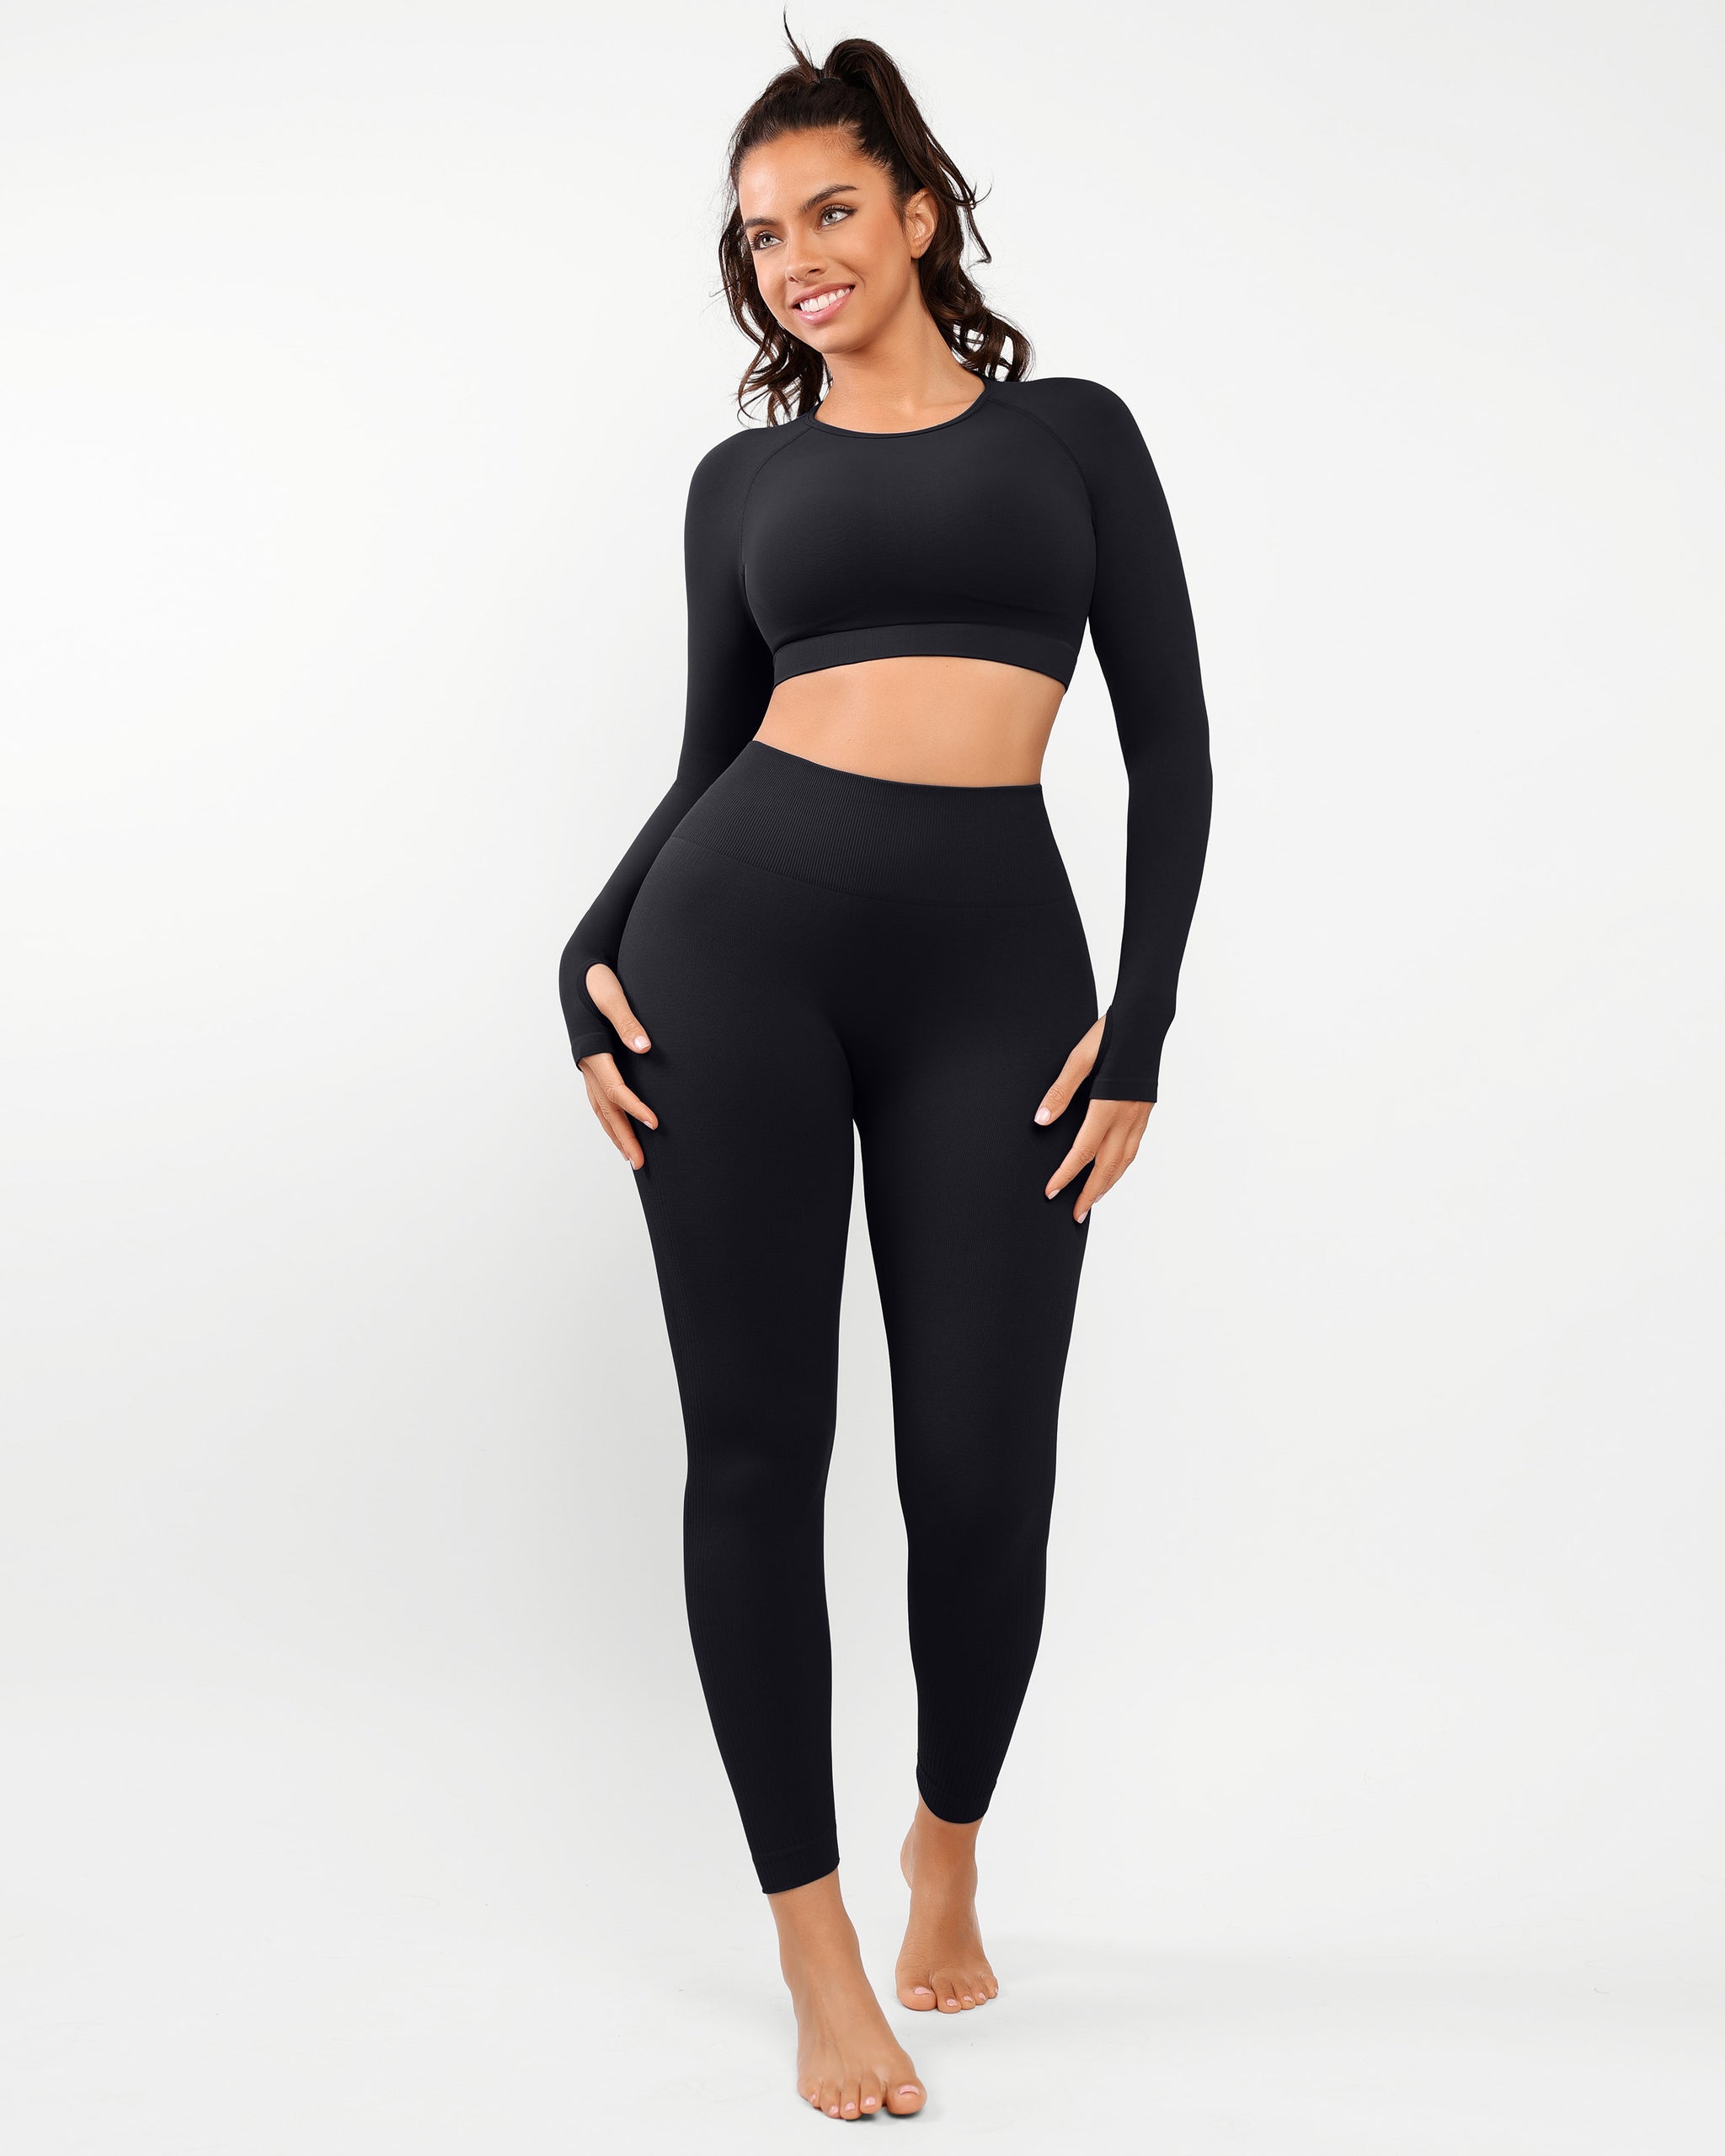 Workout Outfits for Women Sexy 2 Piece Long Sleeve High Waist Leggings with  Crop Tops Exercise Yoga Set (Brown , M )